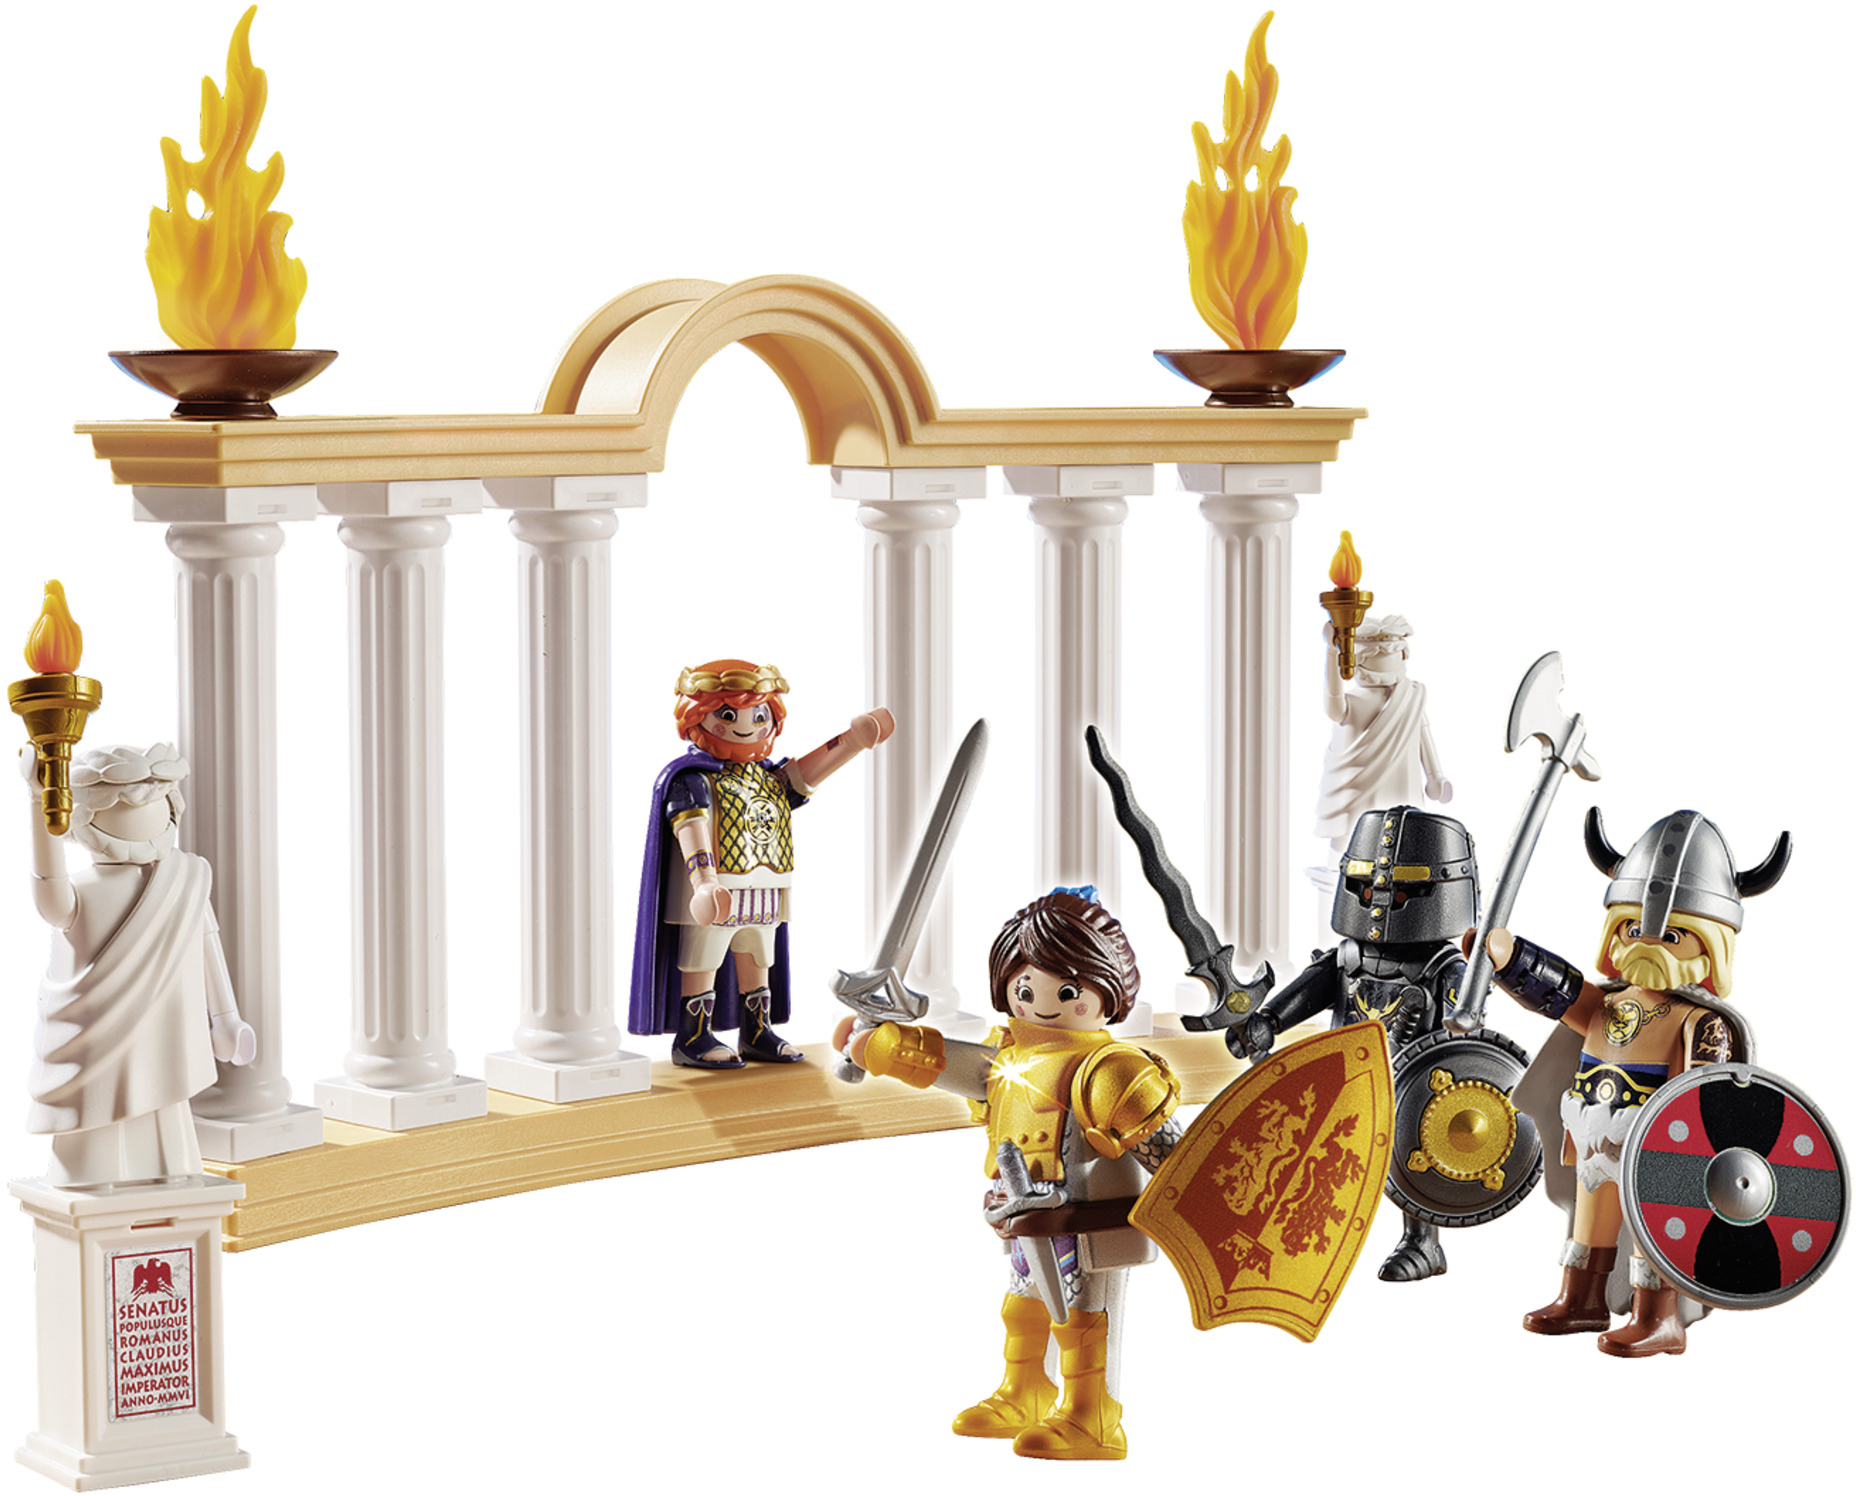 PLAYMOBIL THE MOVIE Emperor Maximus in the Colosseum - image 2 of 5